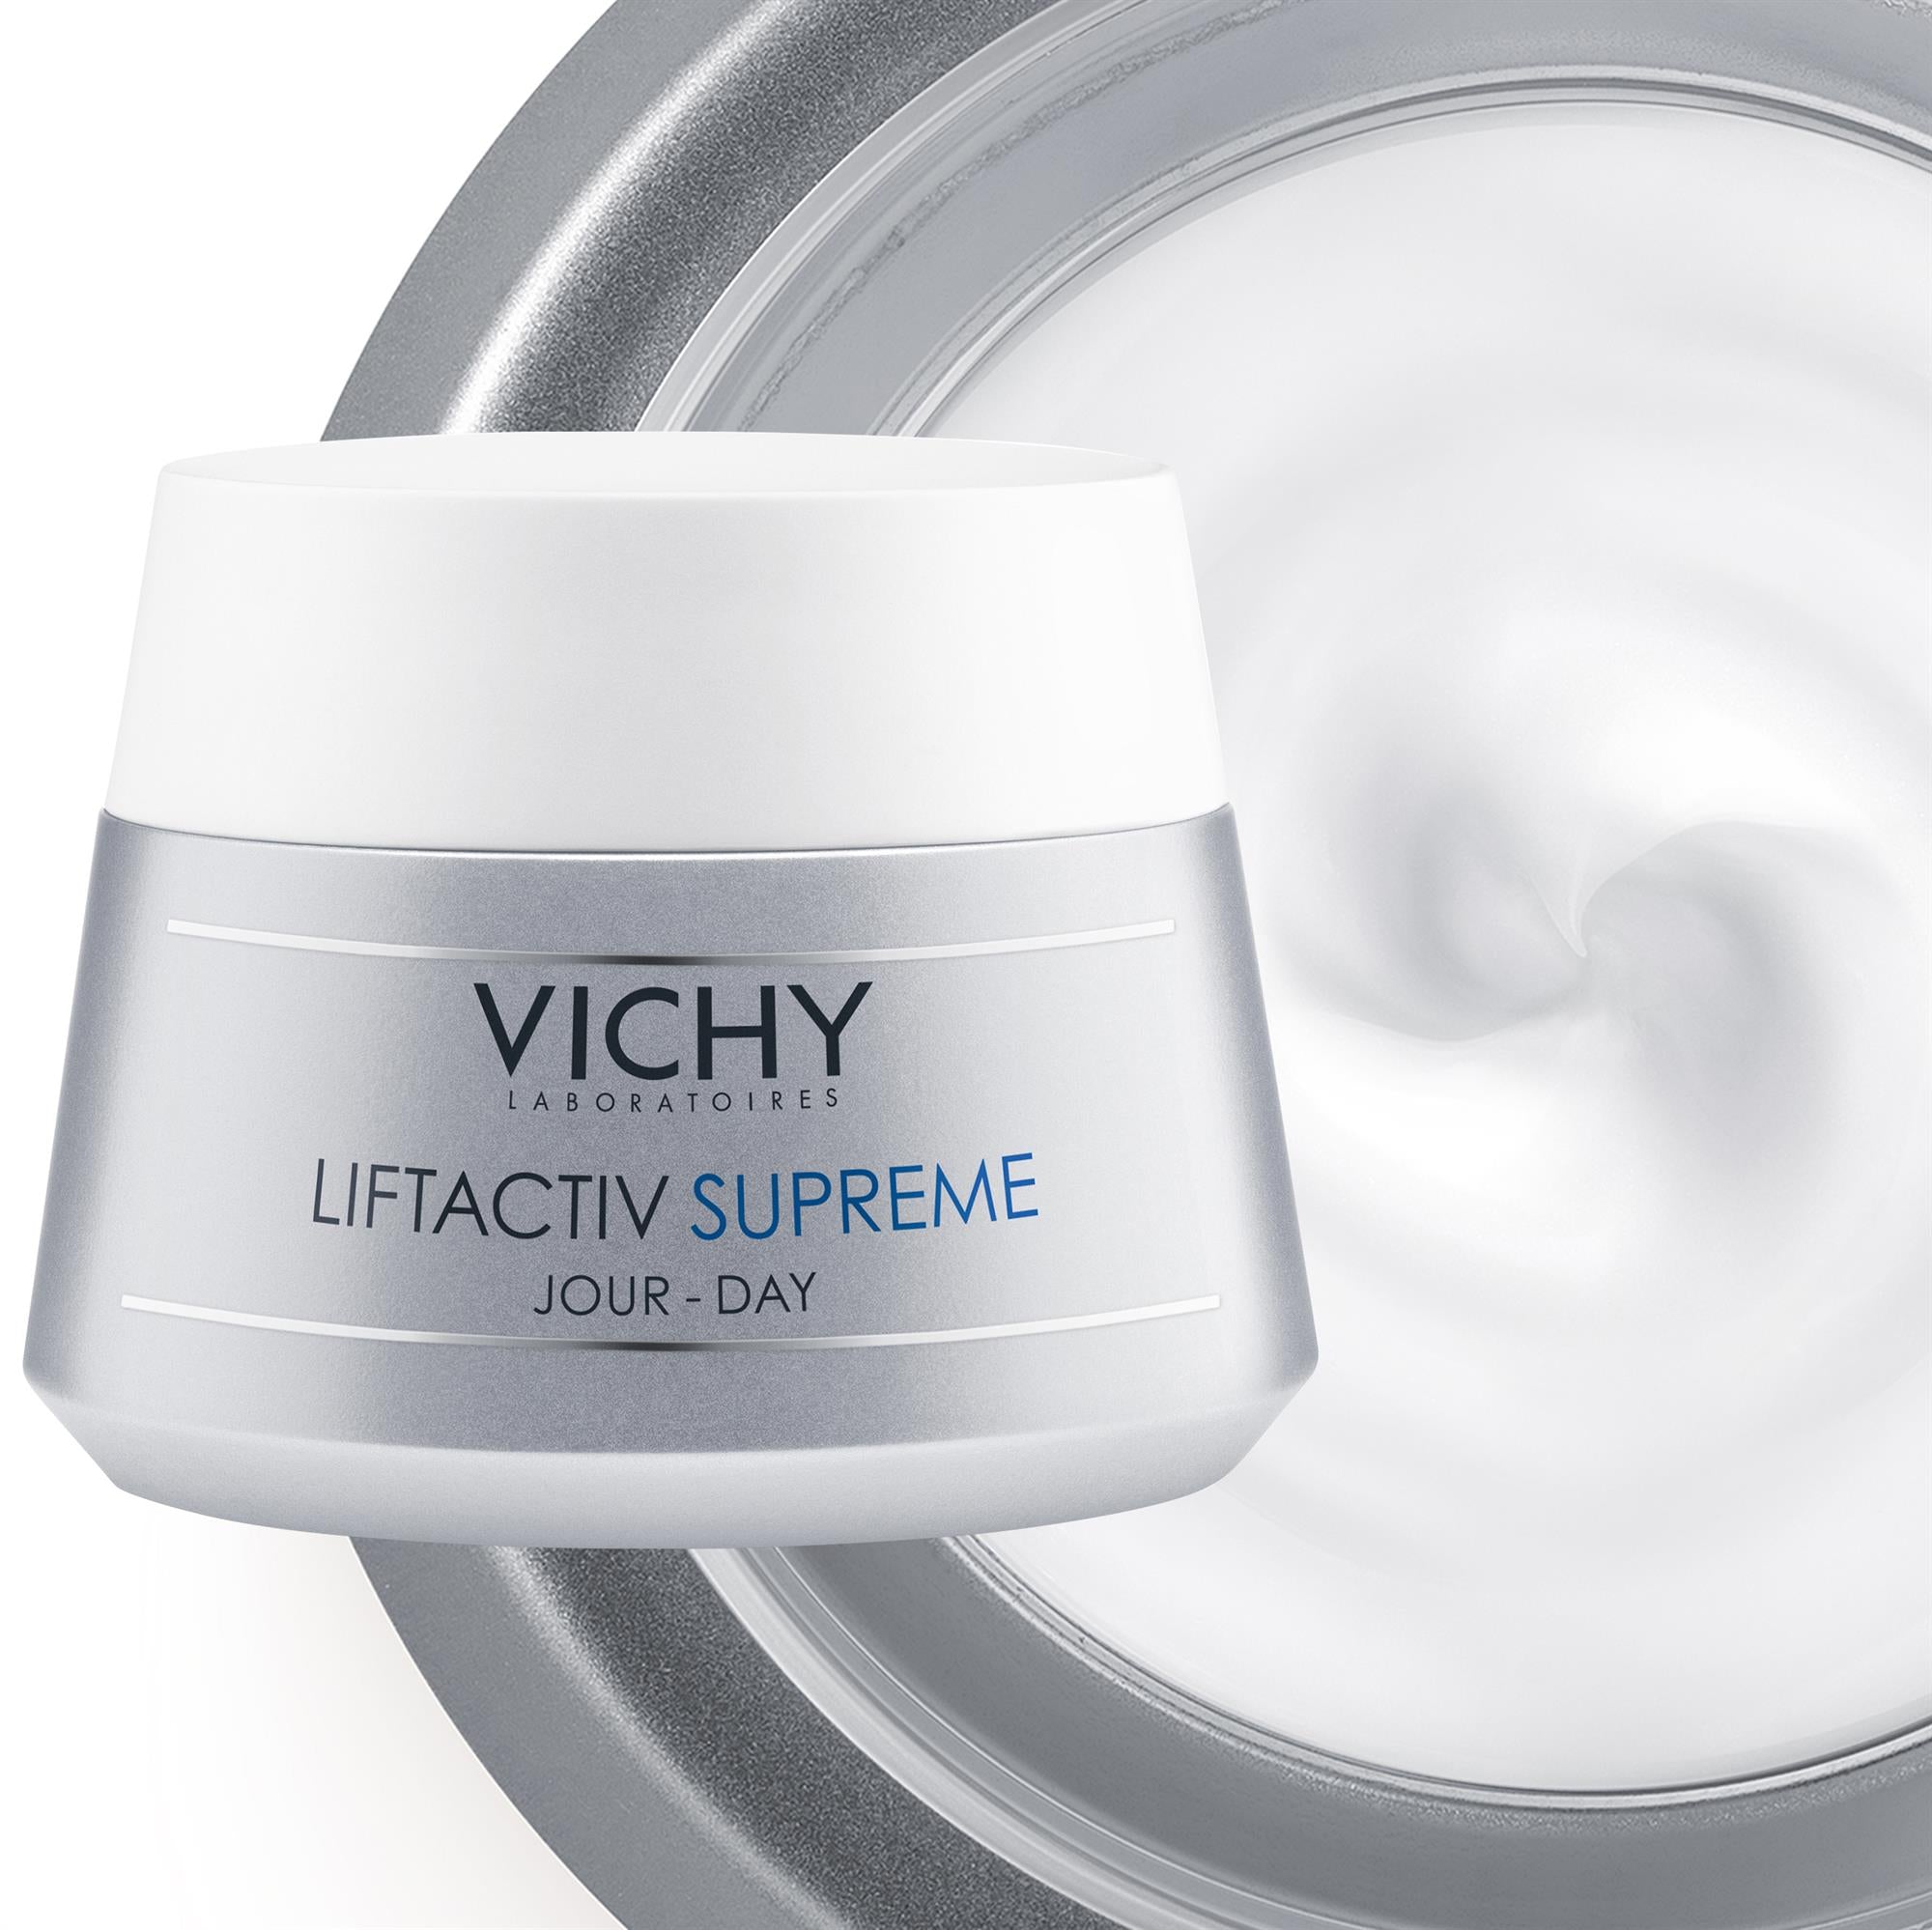 Vichy Liftactiv Supreme Day Cream - Normal To Combination Skin-50ML .